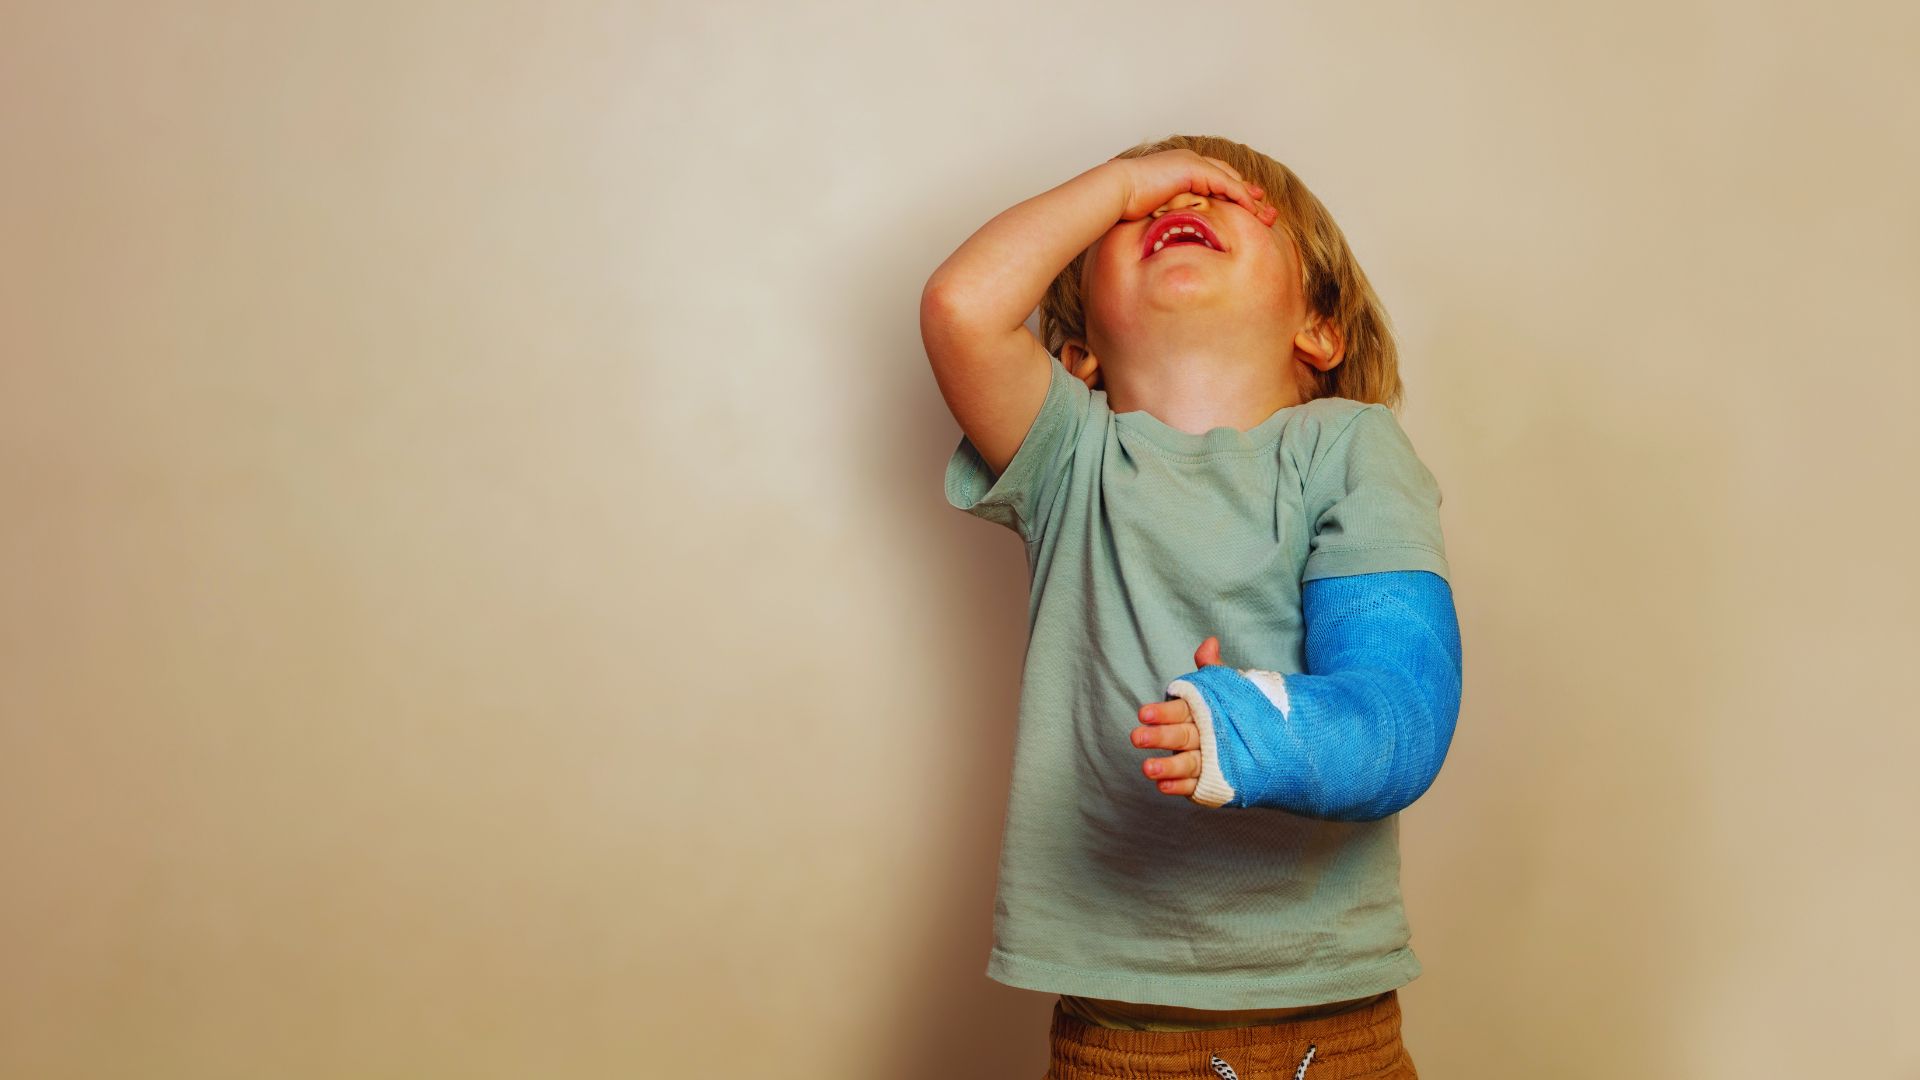 Young boy with a broken elbow. Pediatric fracture rehabilitation at Propel Physiotherapy.